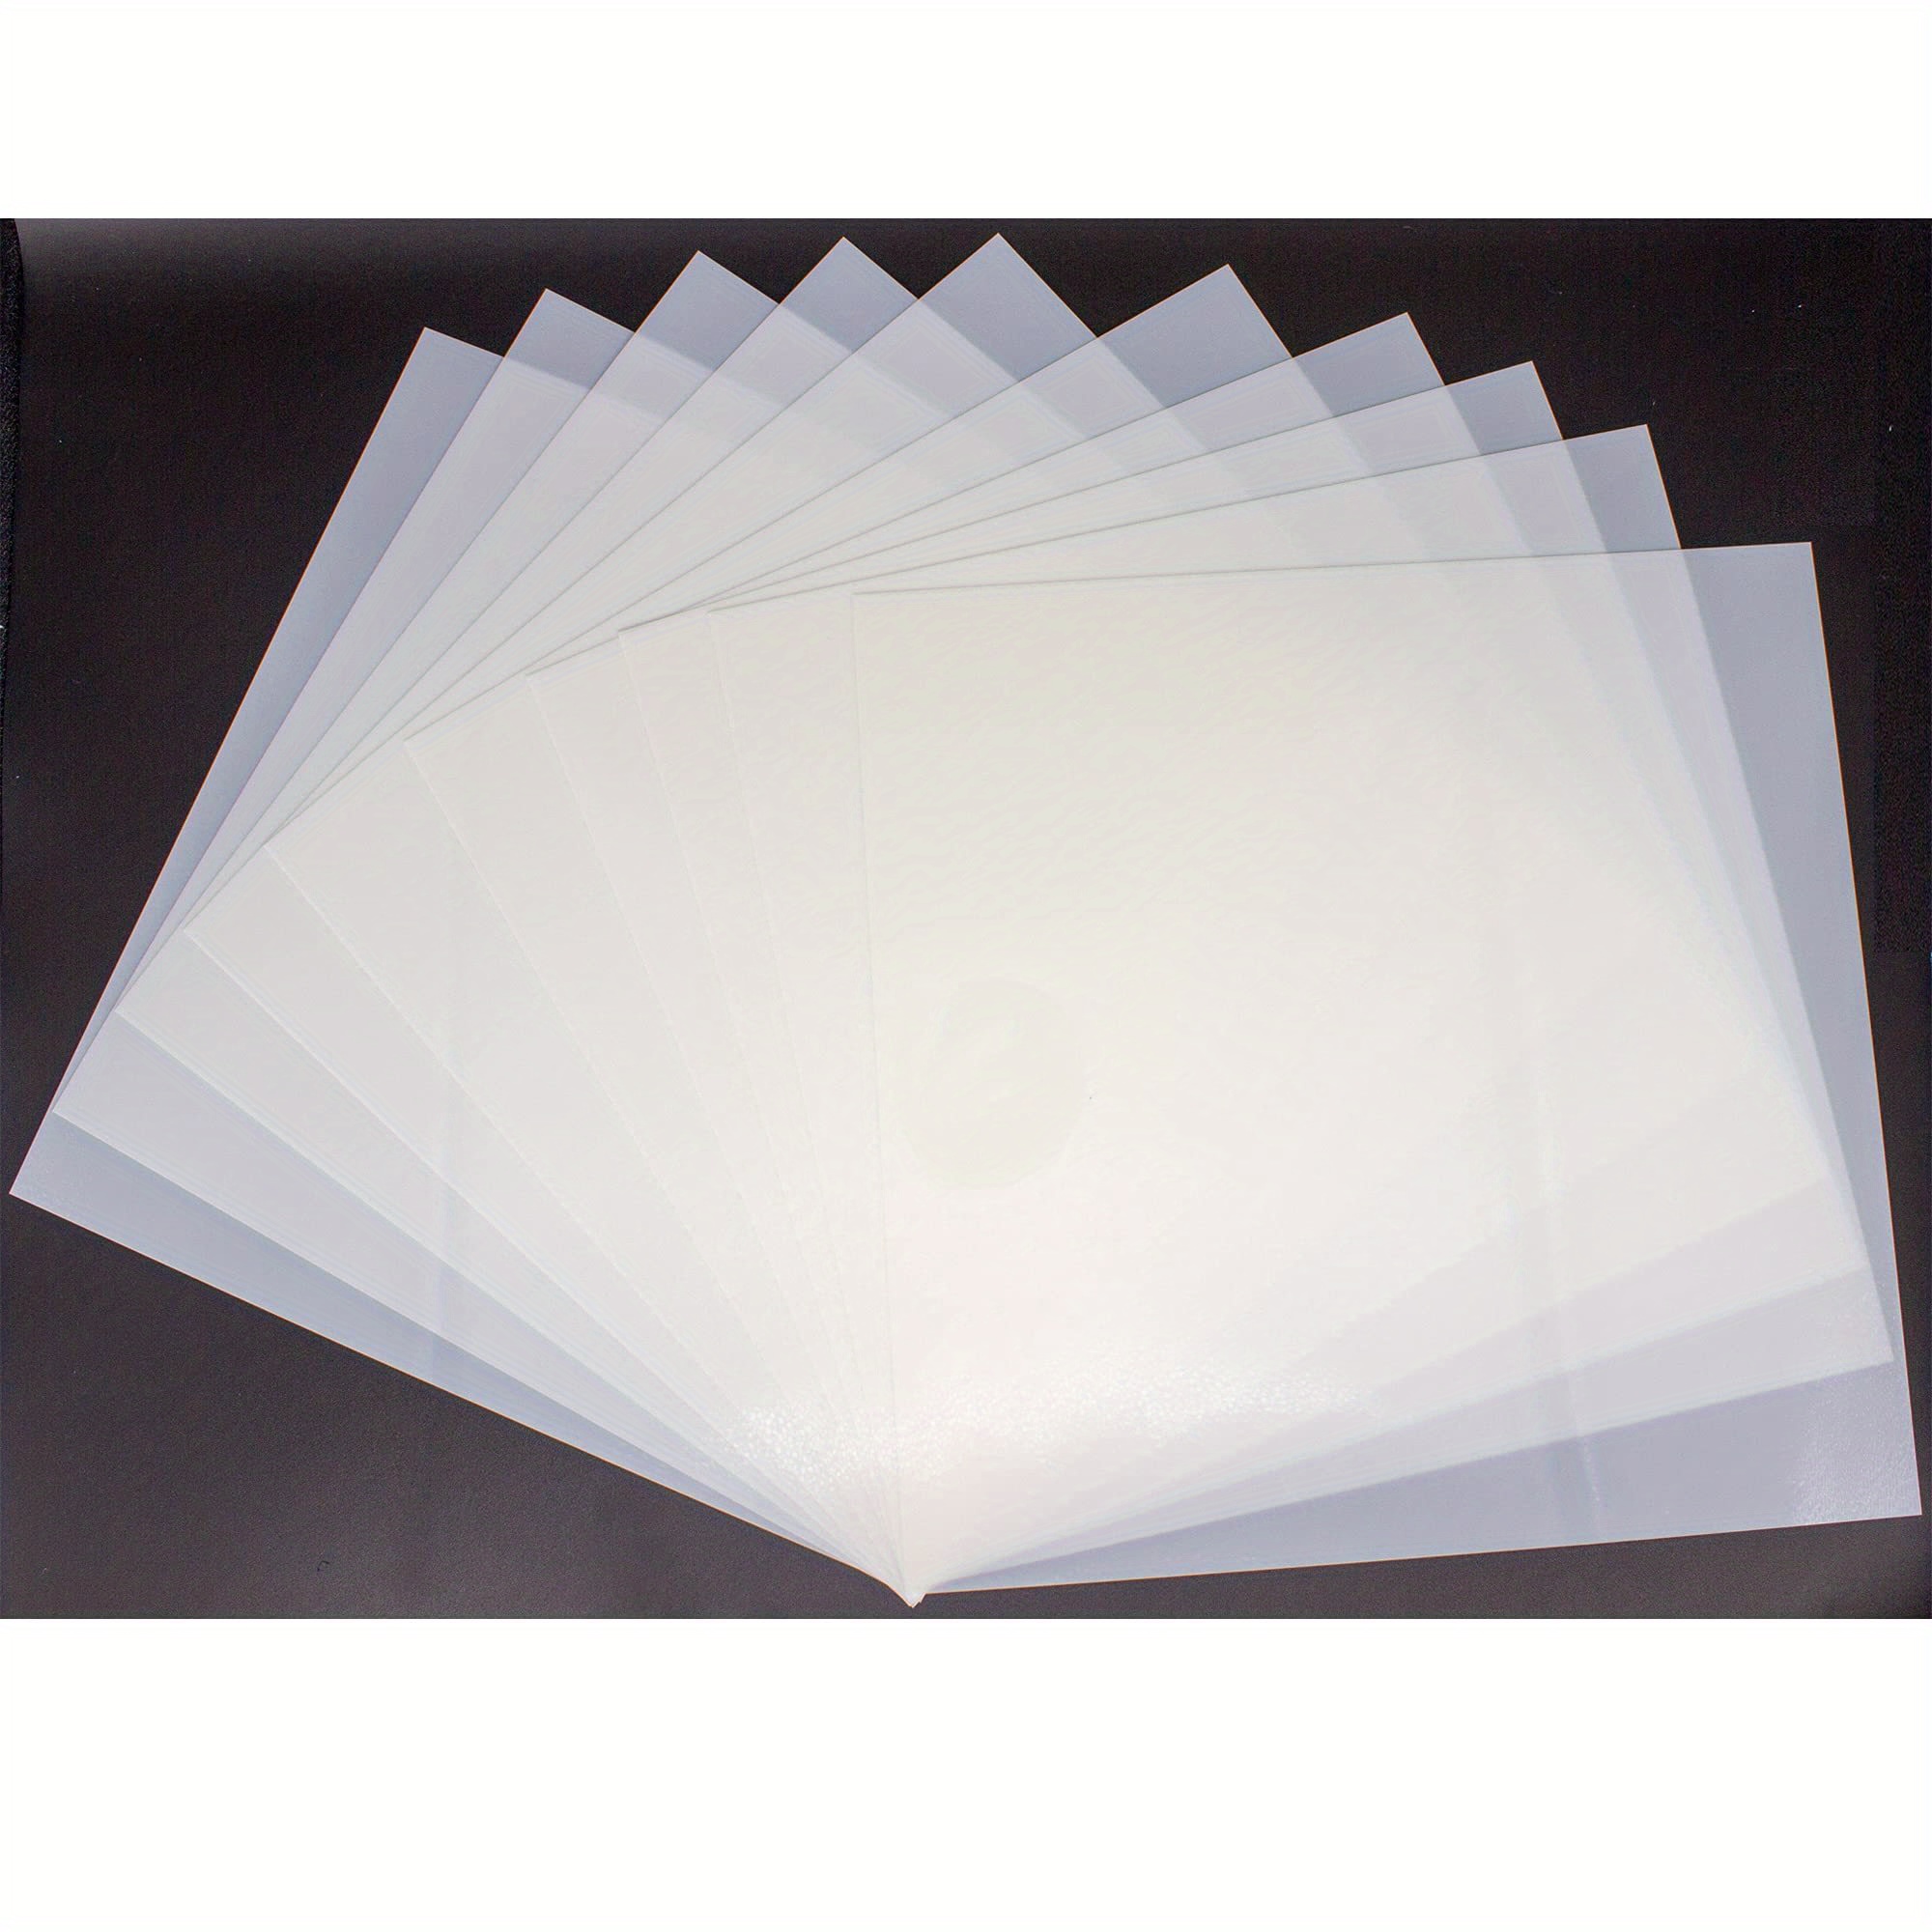 Clear Blank Stencil Vinyl Paper Acetate Sheets for Crafts, 5 Mil, 12 x 12  In